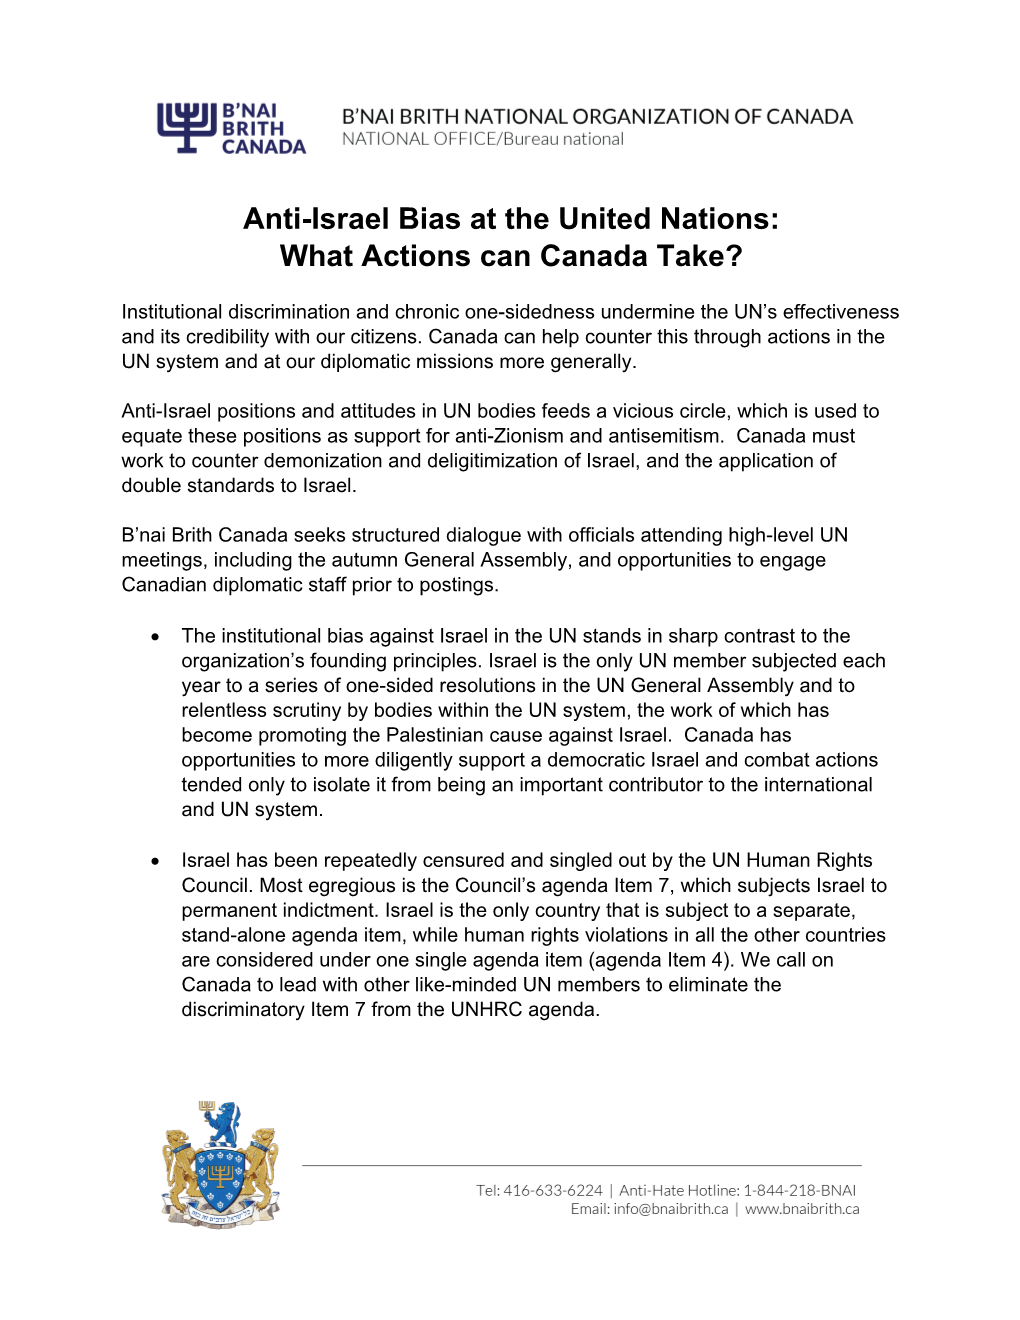 Anti-Israel Bias at the United Nations: What Actions Can Canada Take?